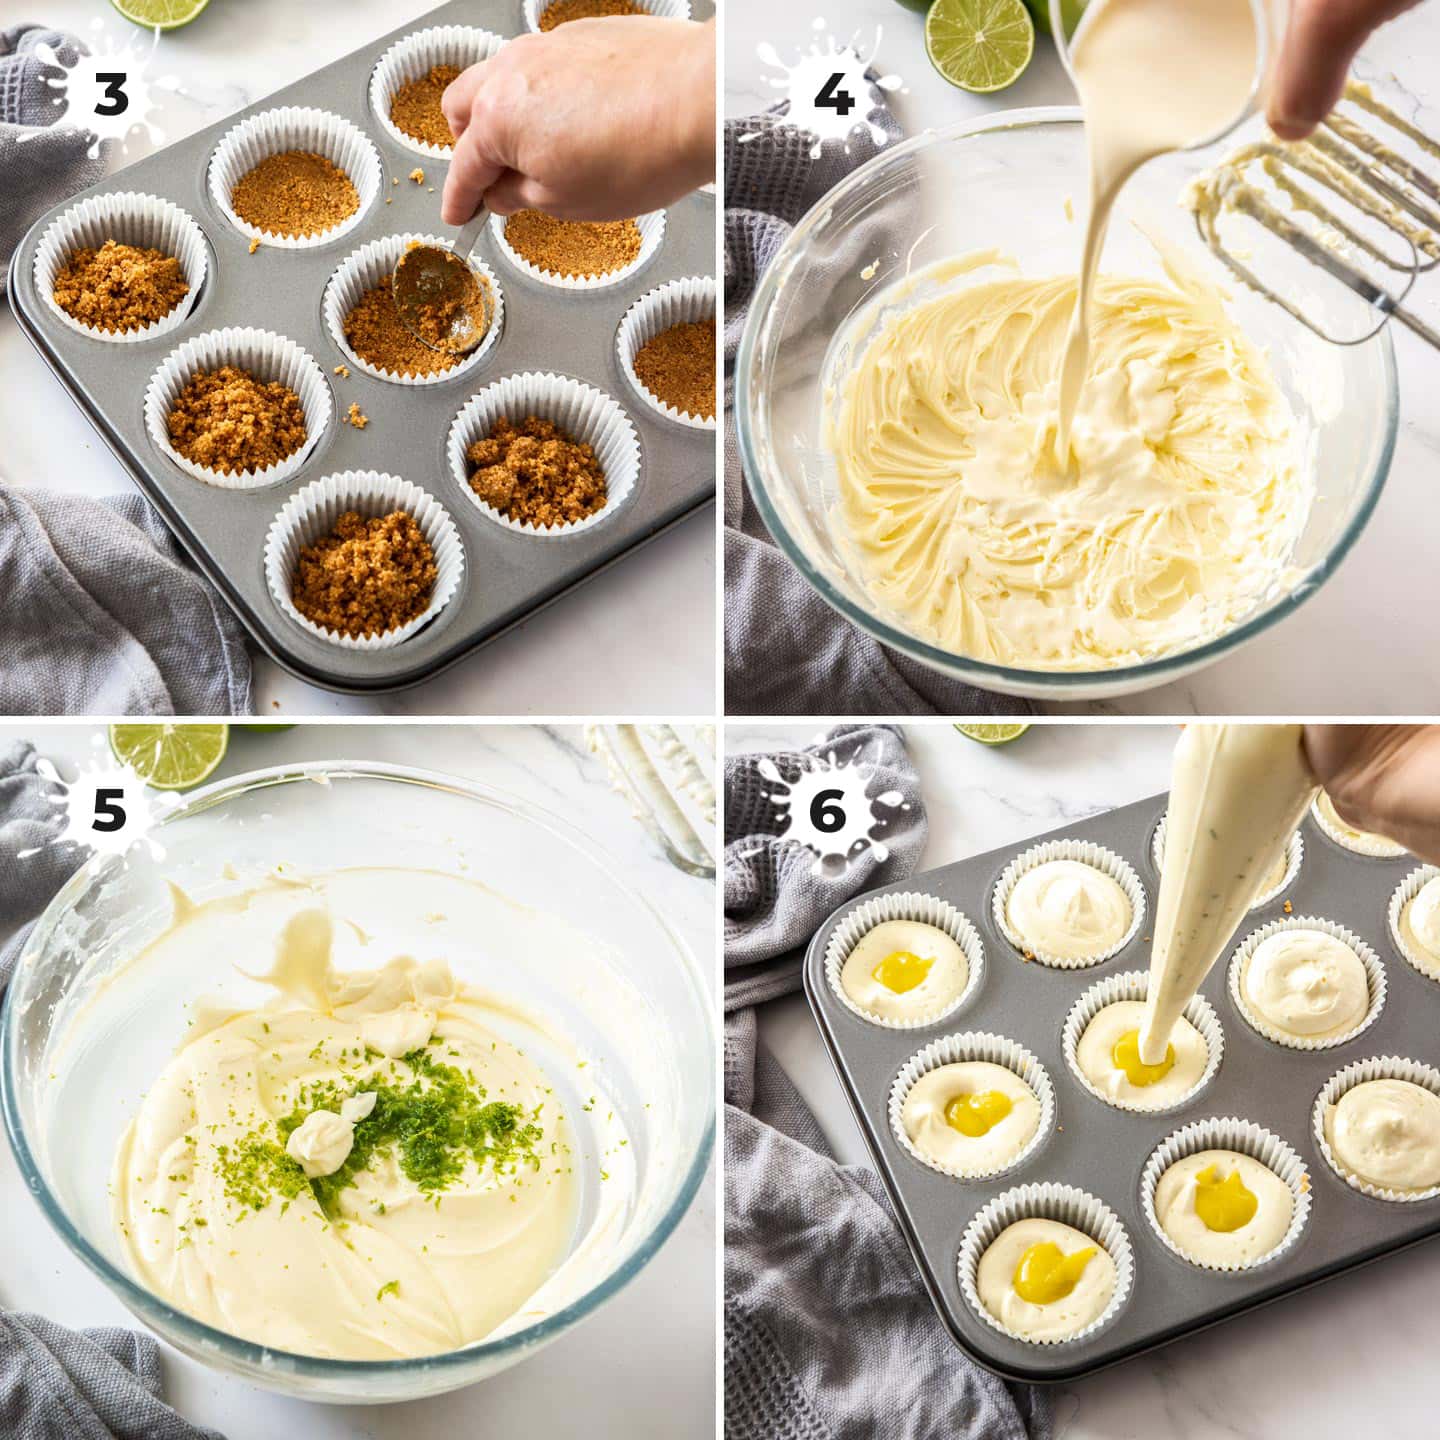 Collage of 4 images showing the making of cheesecake batter and piping into a muffin tin